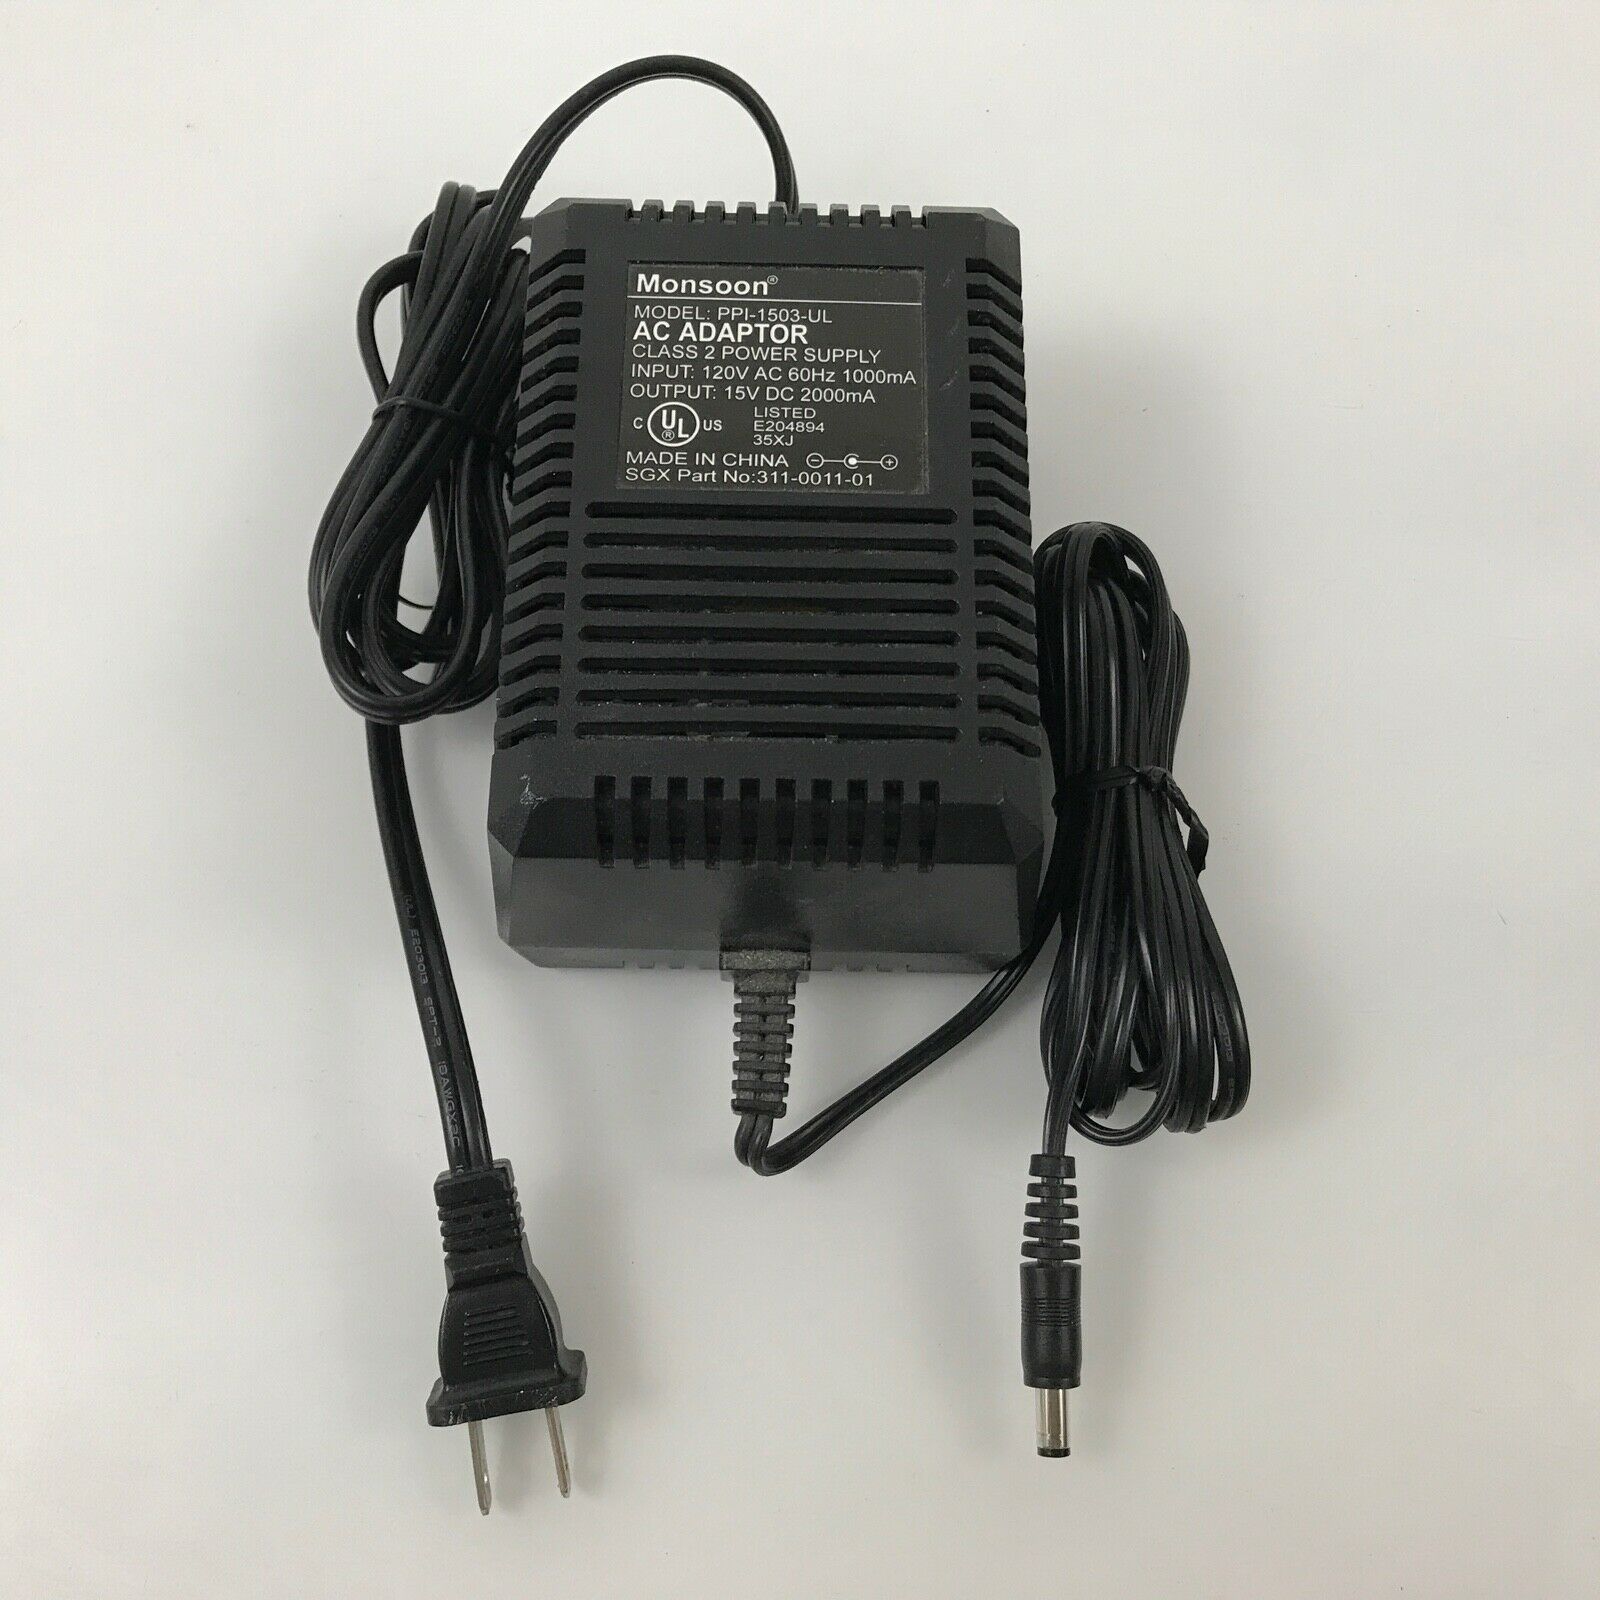 NEW 15V DC 2000mA Monsoon AC Adapter PPI-1503-UL Switching Power Supply Cord Charger